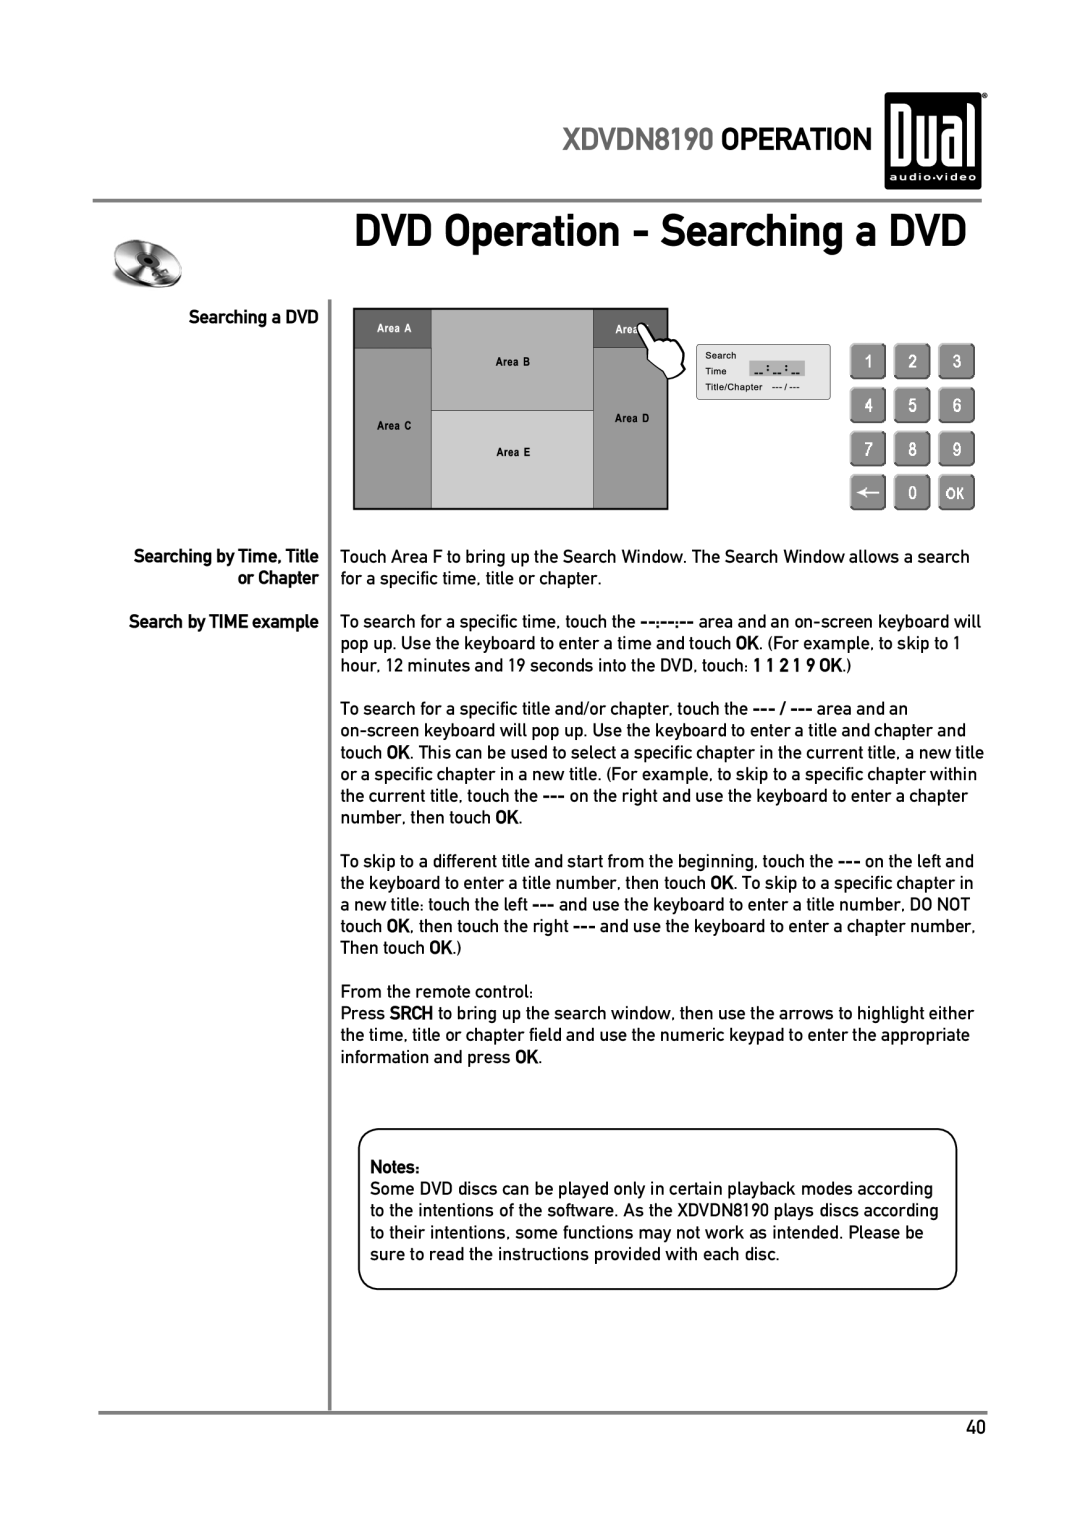 Dual owner manual DVD Operation - Searching a DVD, XDVDN8190 OPERATION, Notes, Search by TIME example 